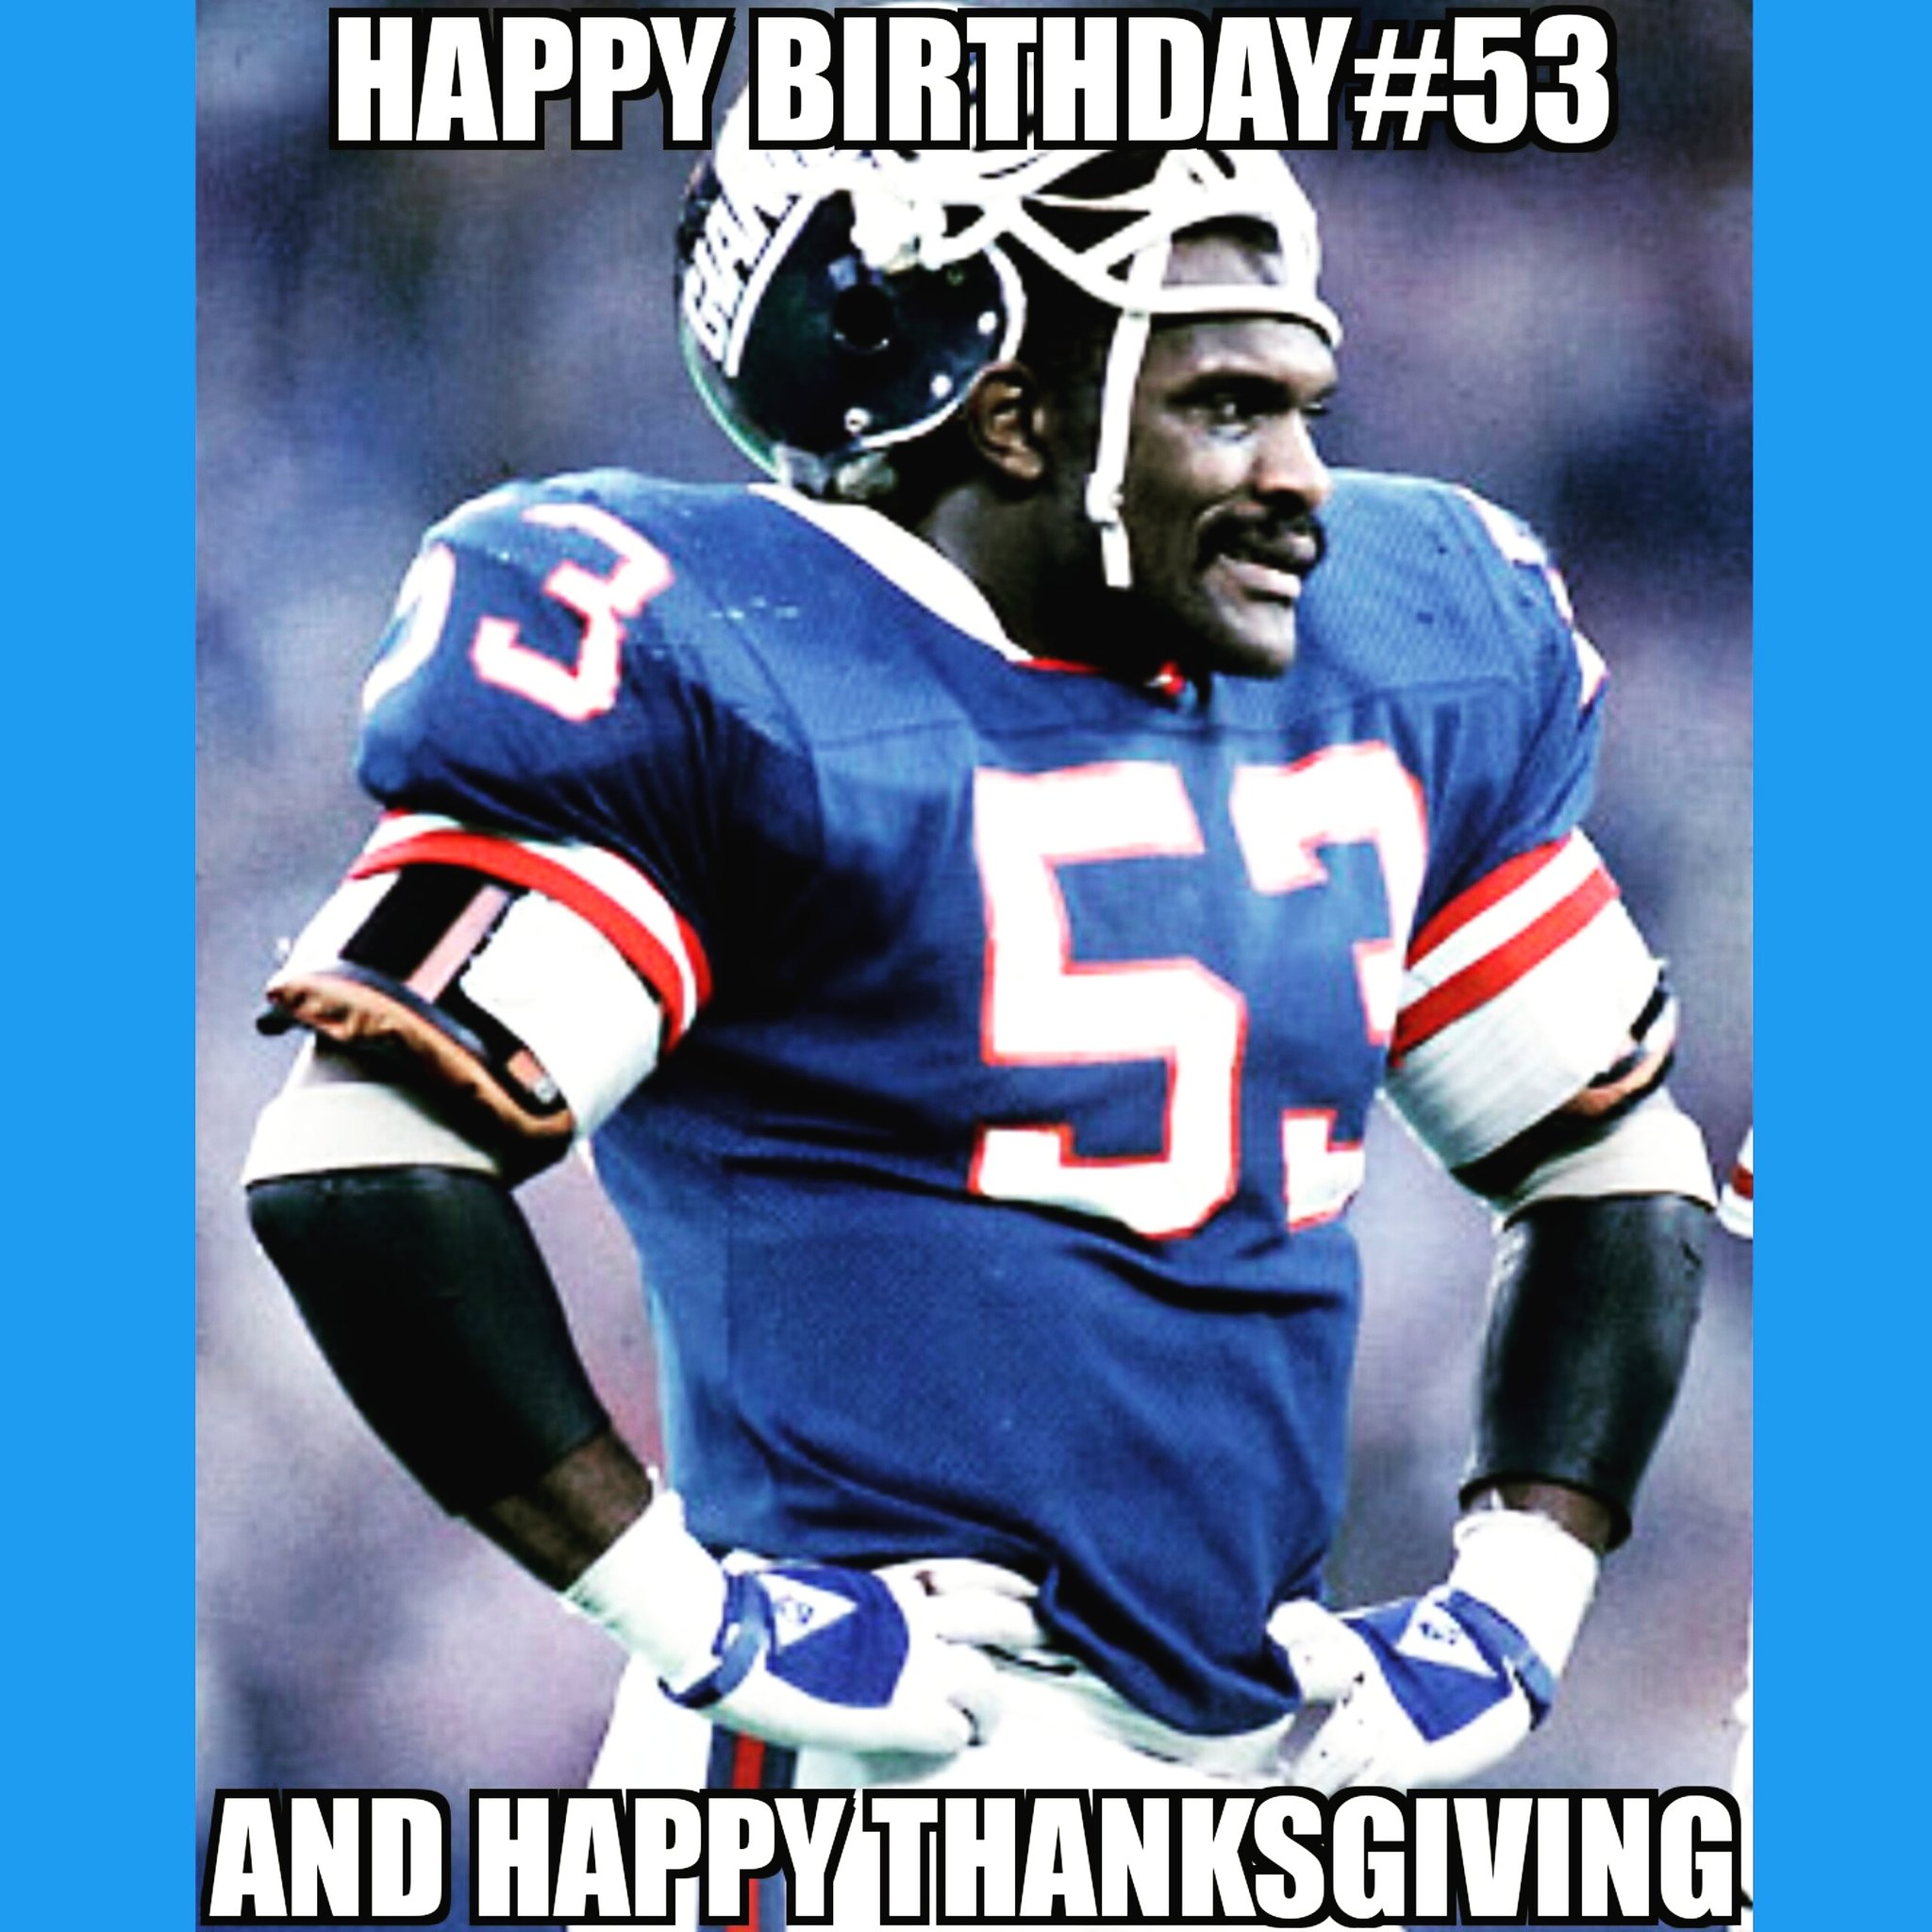 HAPPY BIRTHDAY TO THE GREAT HARRY CARSON  AND A HAPPY THANKSGIVING TO ALL 